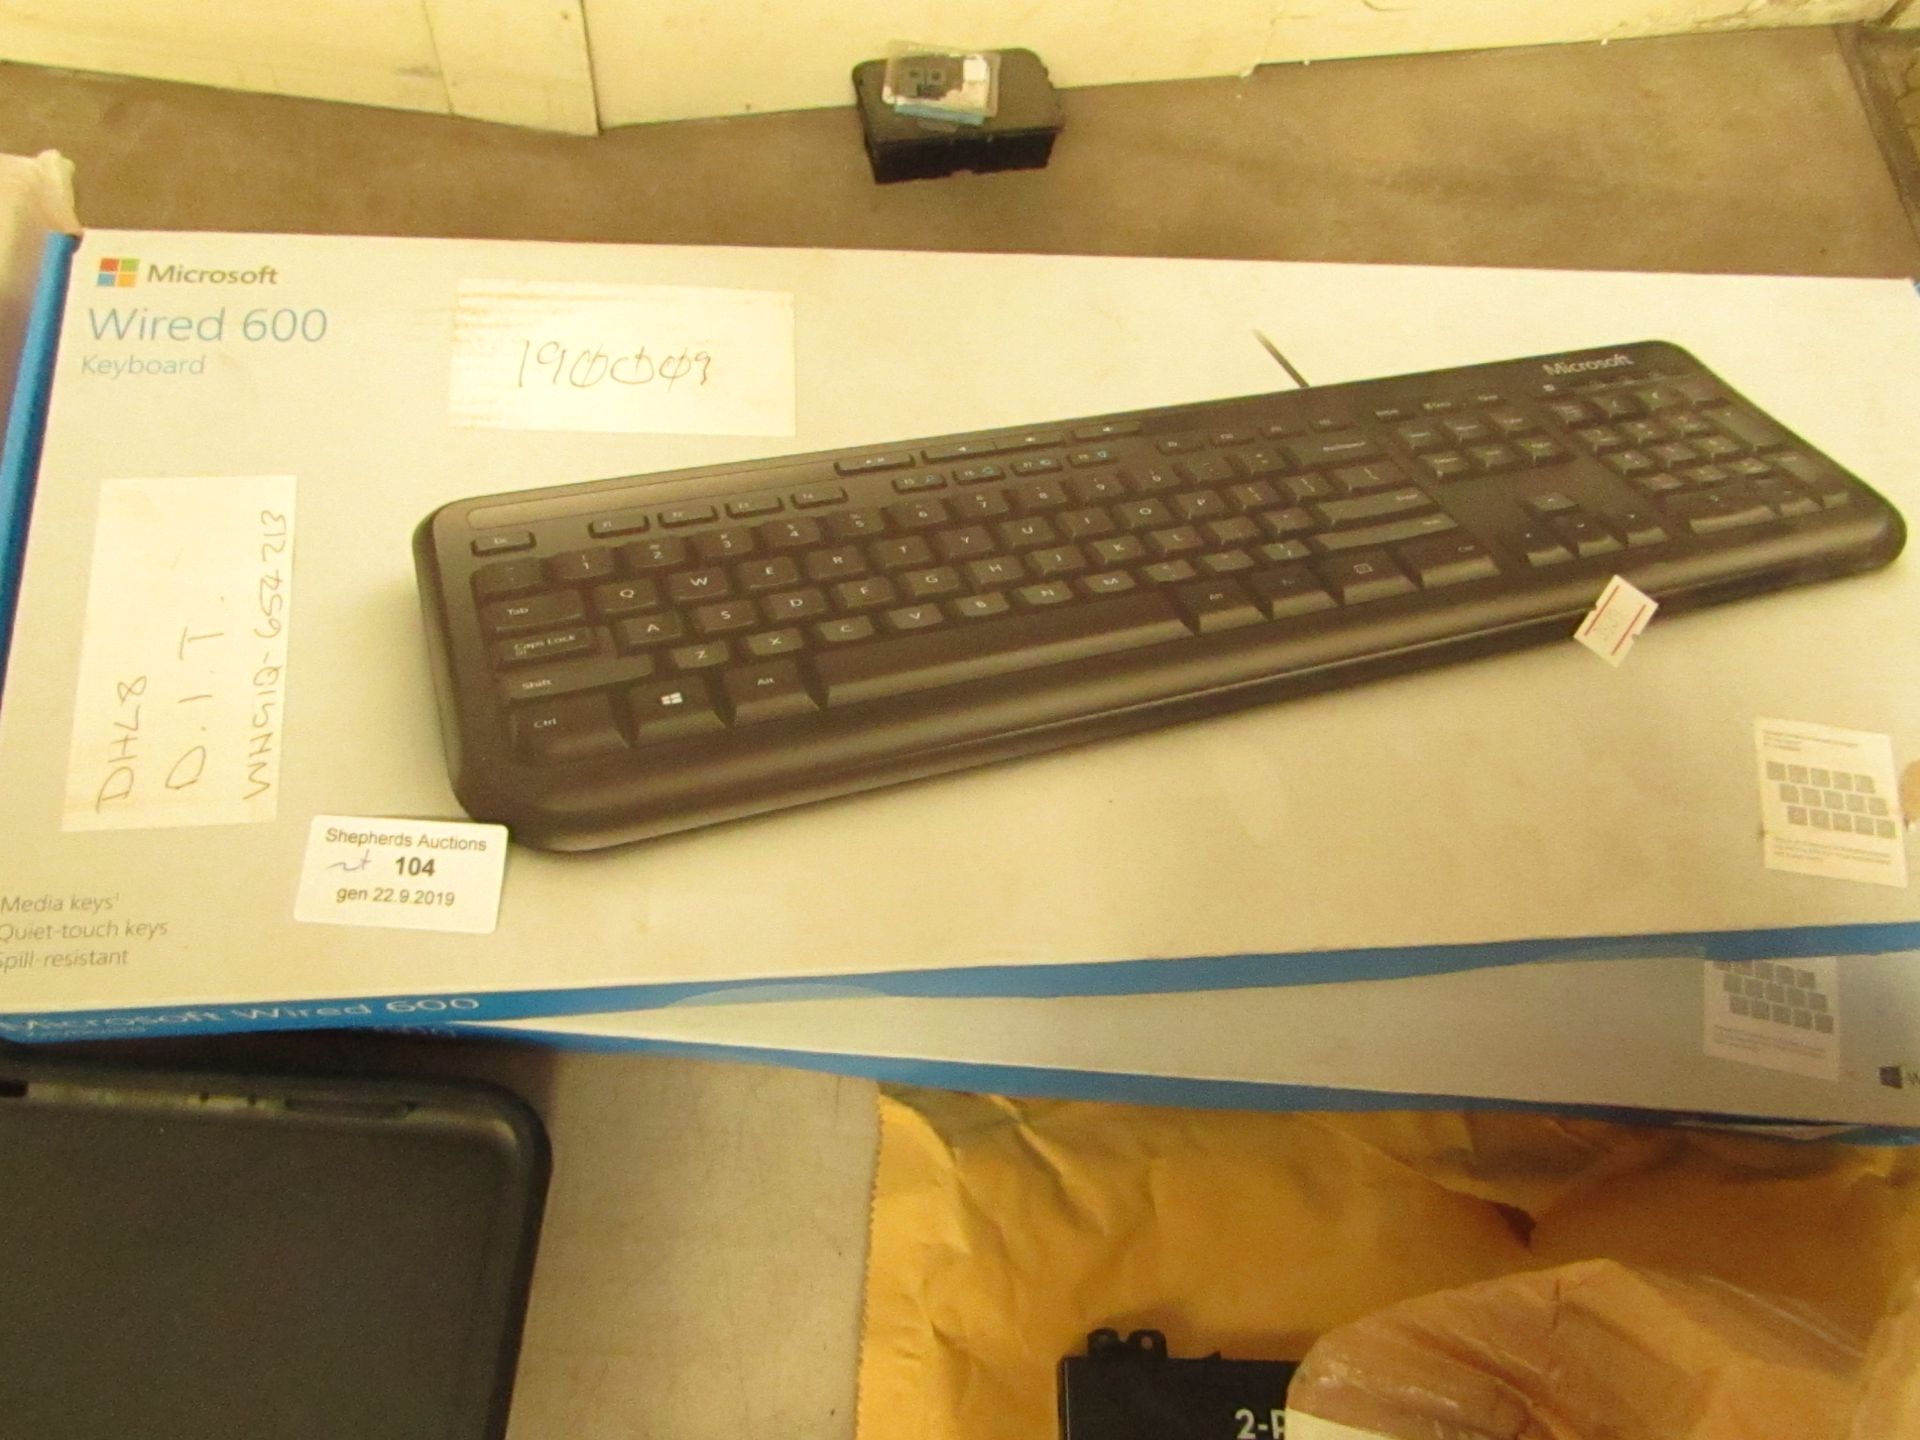 2 x Microsoft Wired 600 Keyboards. Both Boxed